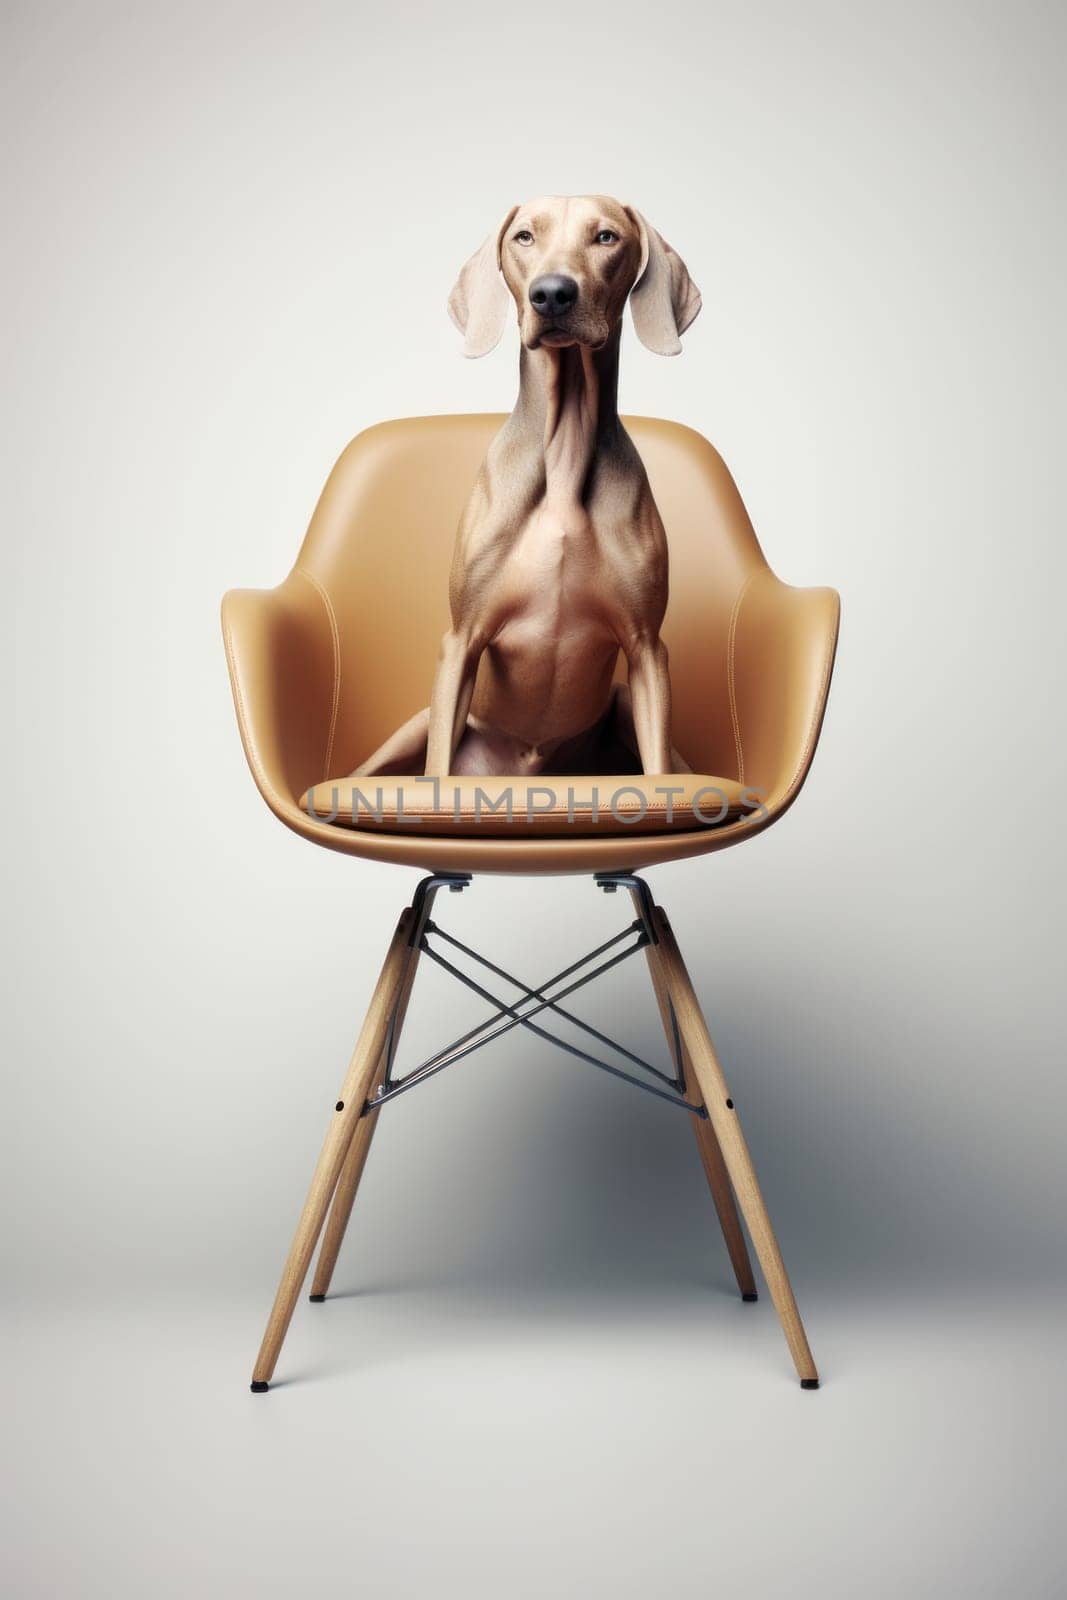 A dog sitting in a chair with a white background